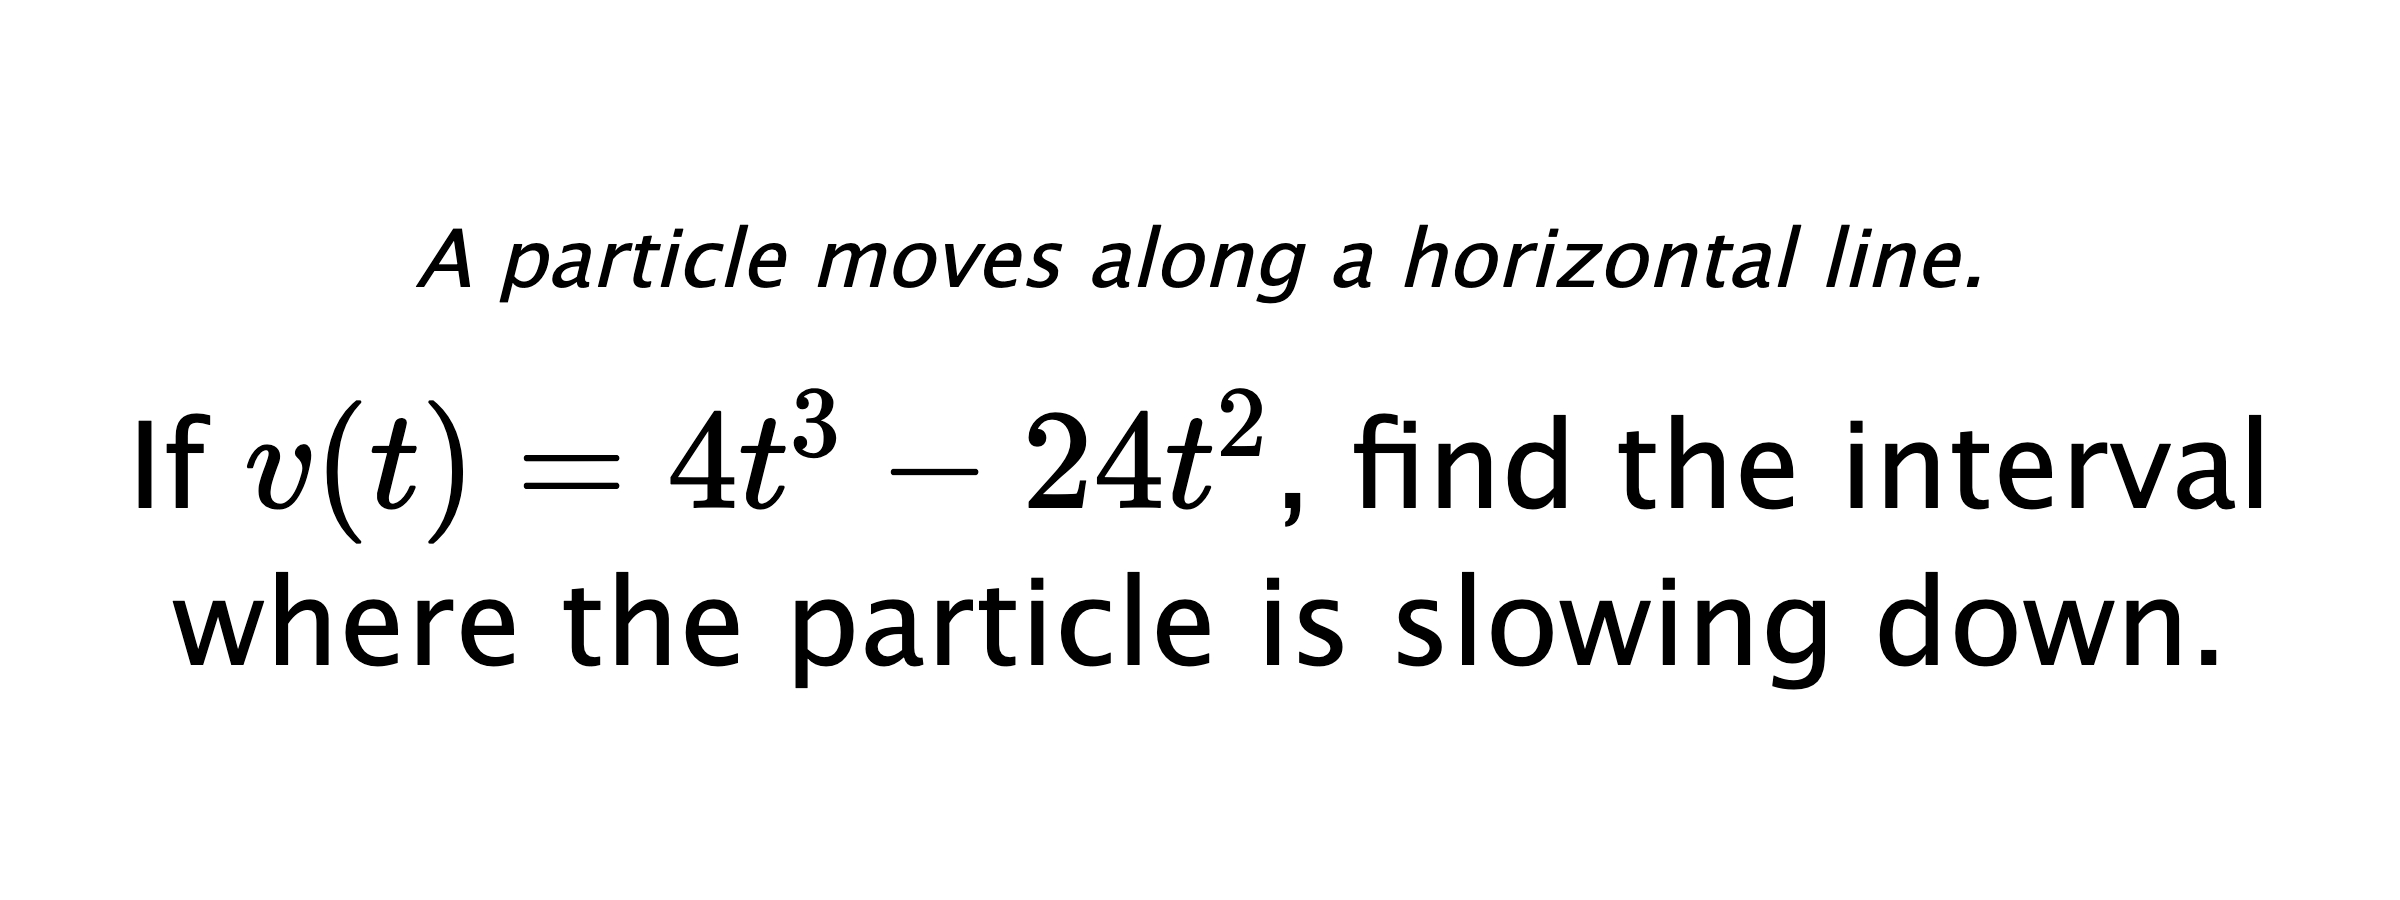 A particle moves along a horizontal line. If $ v(t)=4t^3-24t^2 $, find the interval where the particle is slowing down.